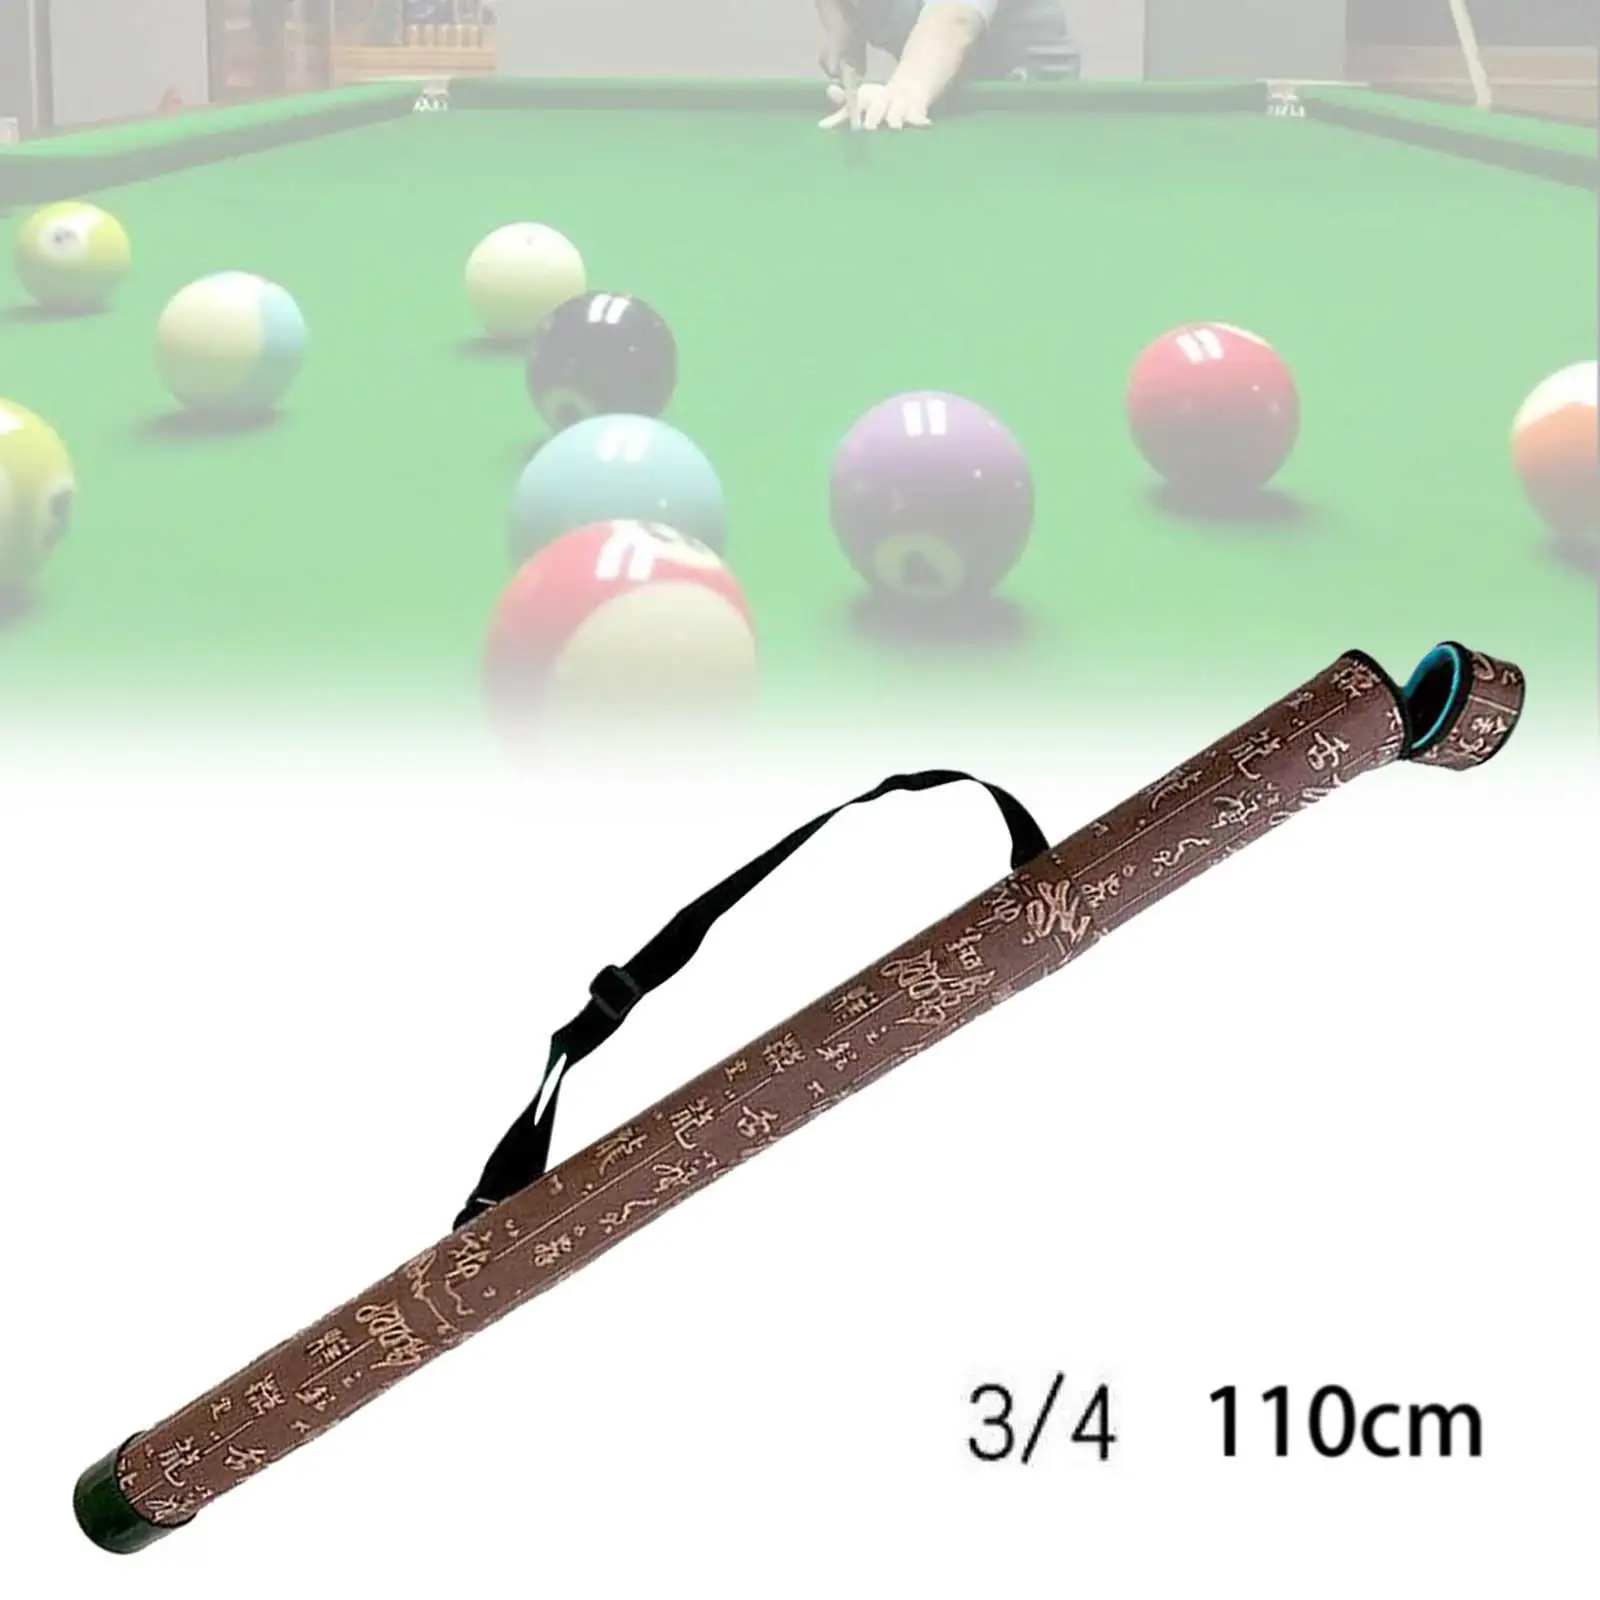 Billiards Pool Cue Case with Shoulder Strap Carrying Box Snooker Club Billiard Stick Rod Protector Dust Proof Professional